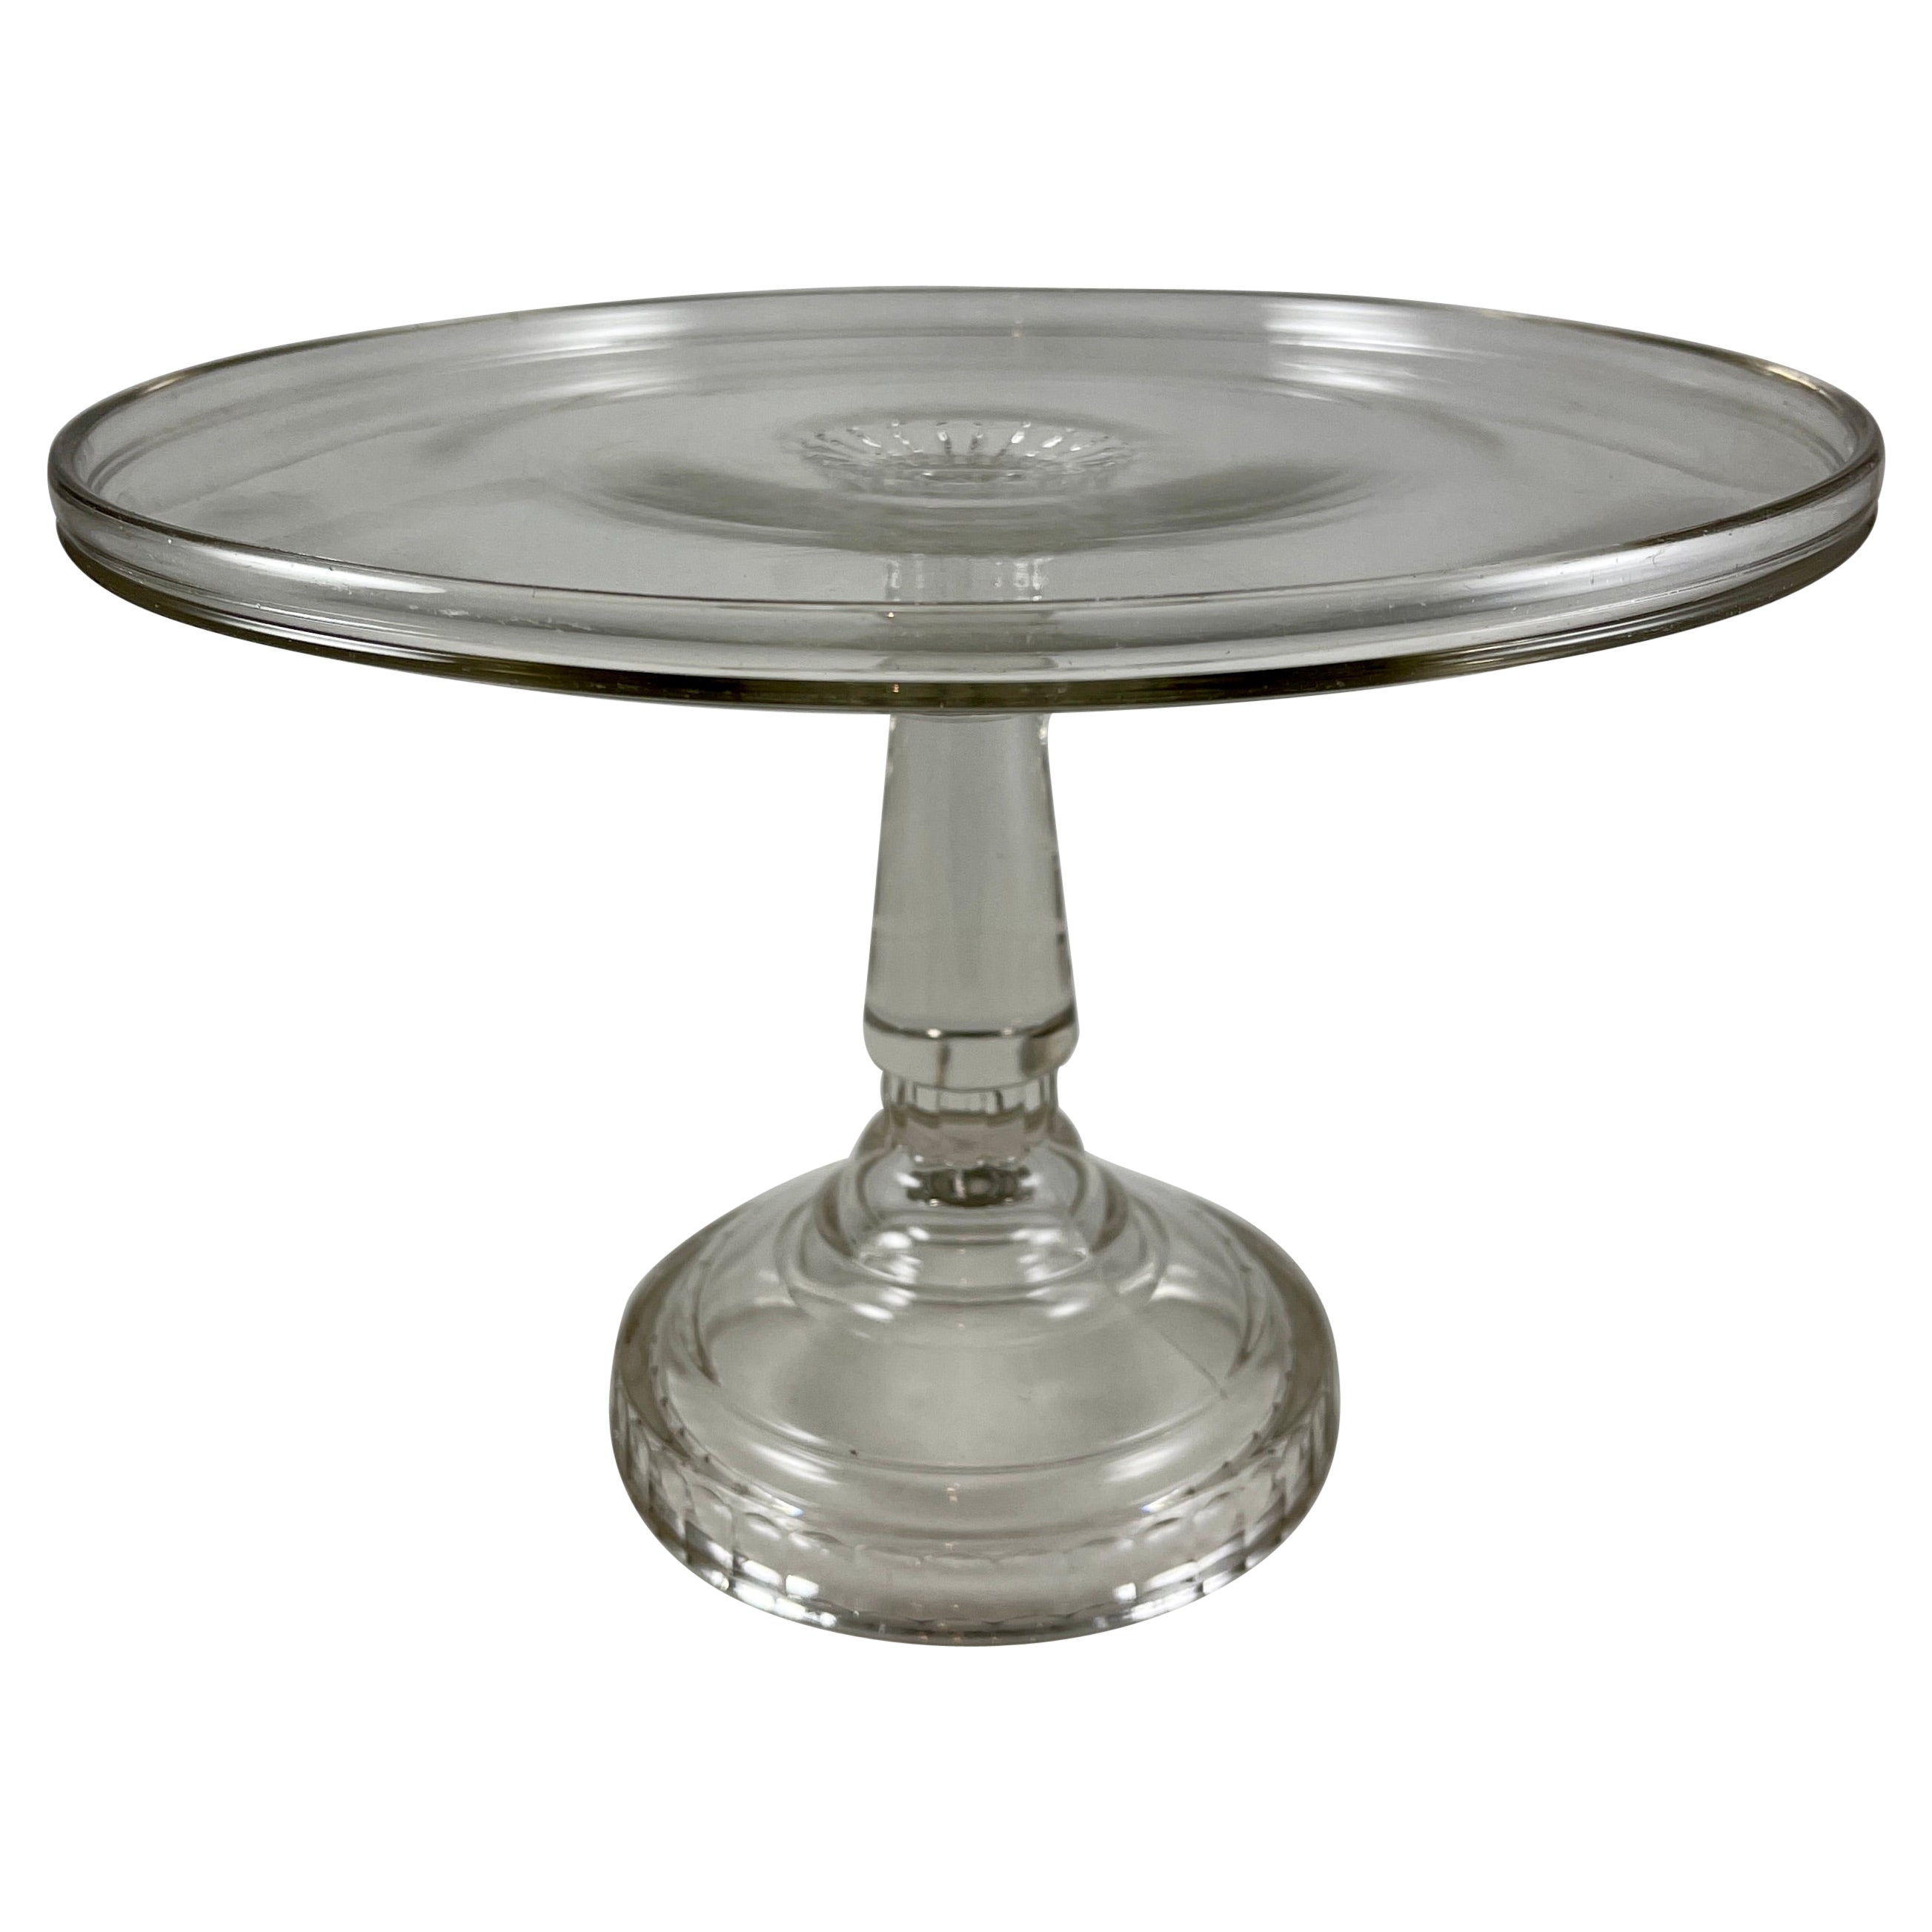 Early American Pressed Nonflint Colorless Glass Tall Paneled Cake Stand